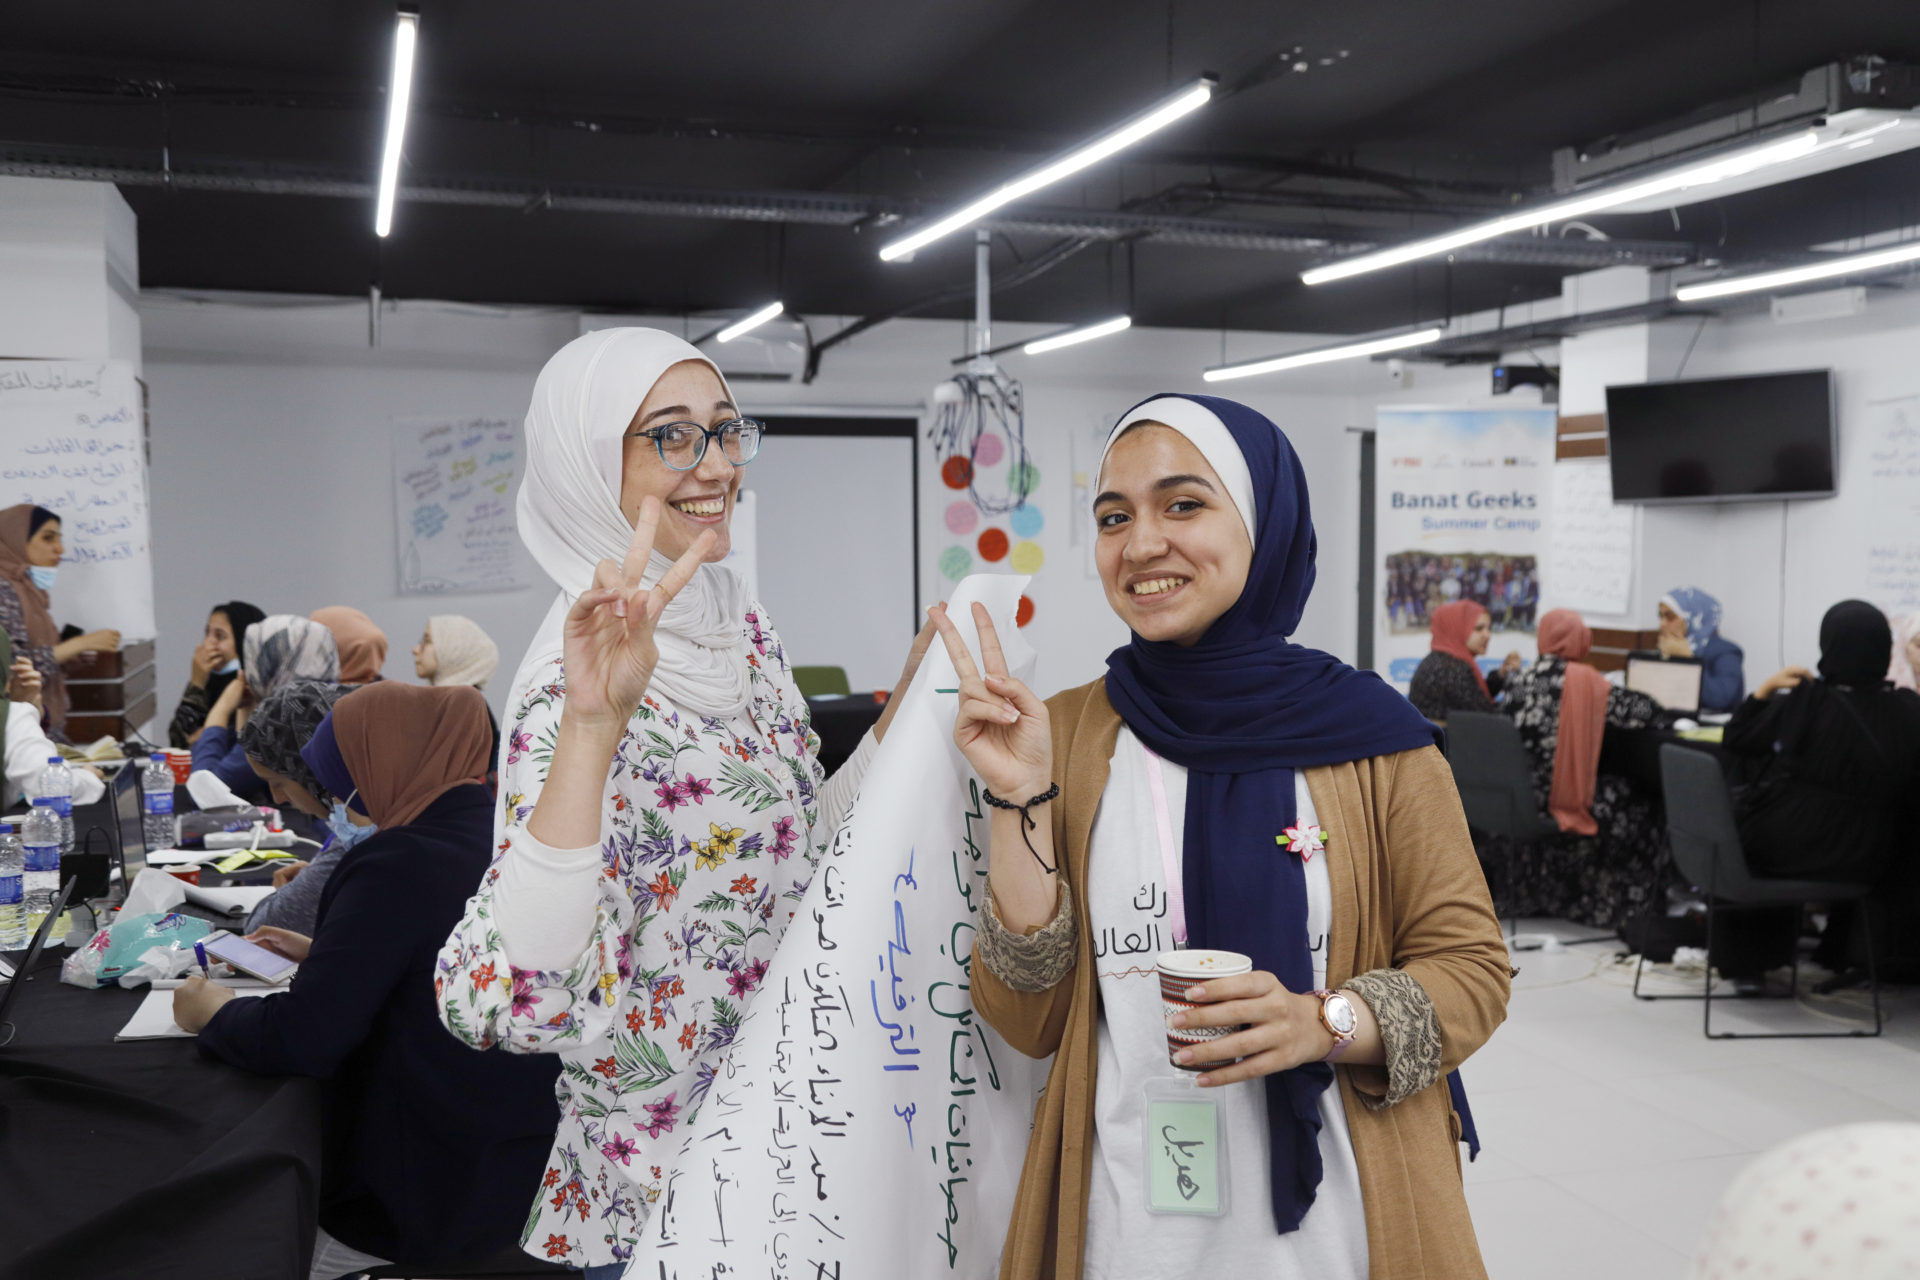 Banat Geeks: Boosting the Employability of Young Women in Gaza